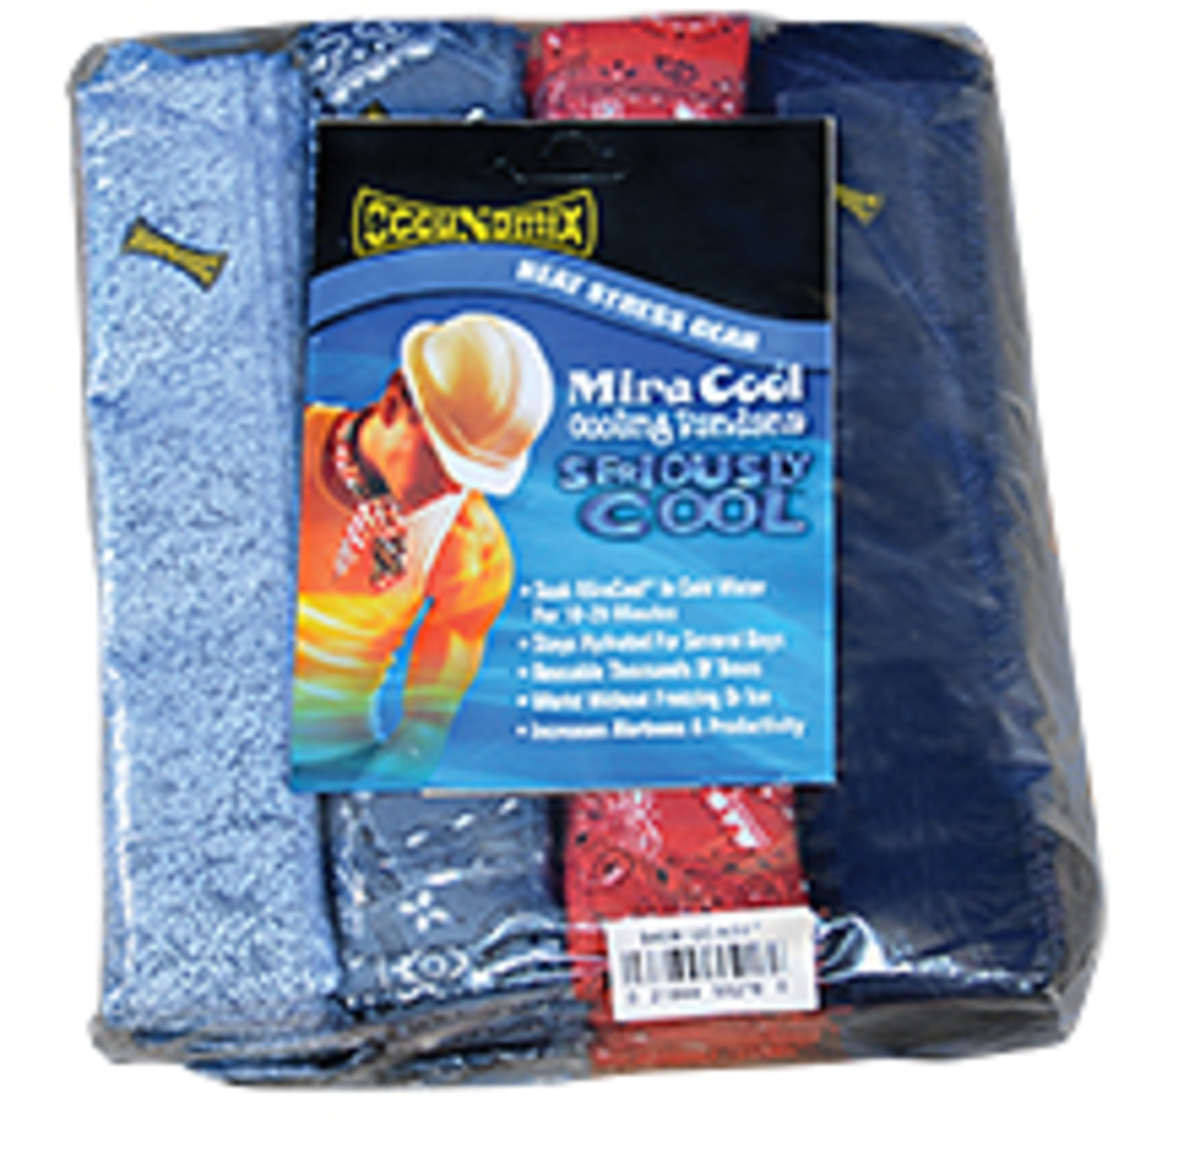 OccuNomix Assorted Colors MiraCool® Cotton Cooling Bandana